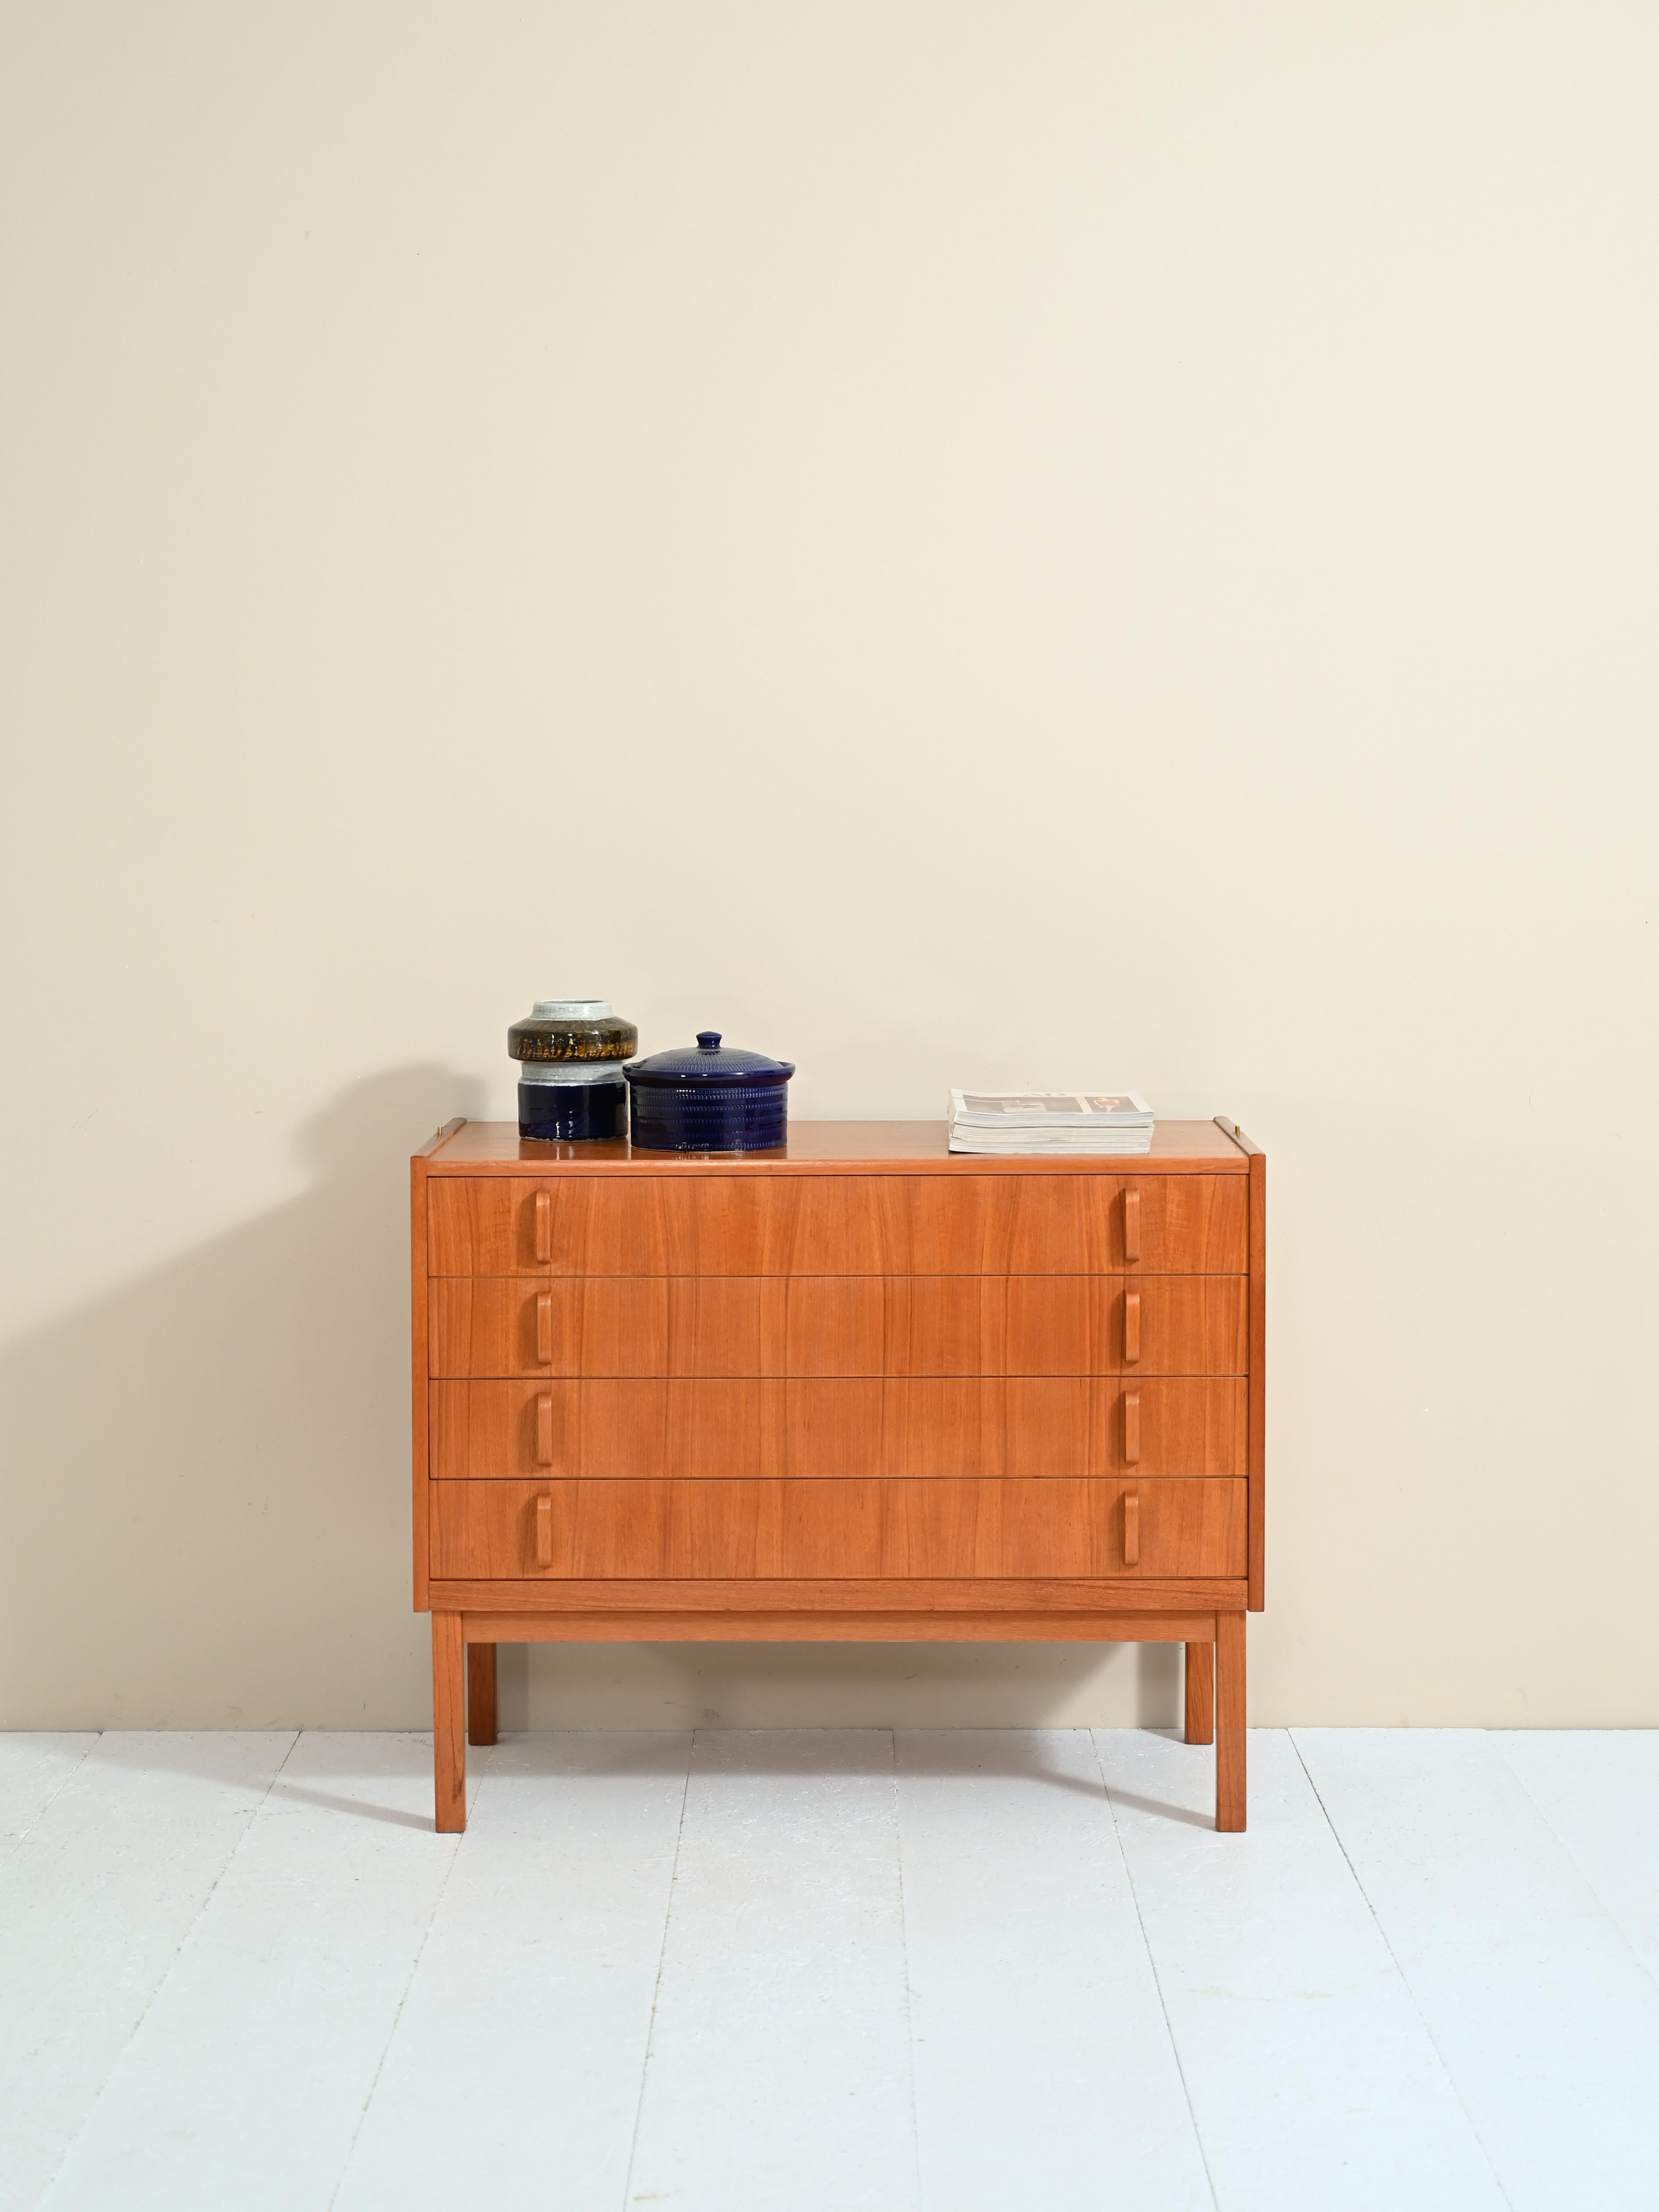 Peculiar teak bookcase cabinet of Scandinavian origin, the manufacture is vintage 1962.

The bookcase consists of 4 shelves, the middle two are adjustable, and four capacious drawers that make up the lower part. 

The curved wood handle of the